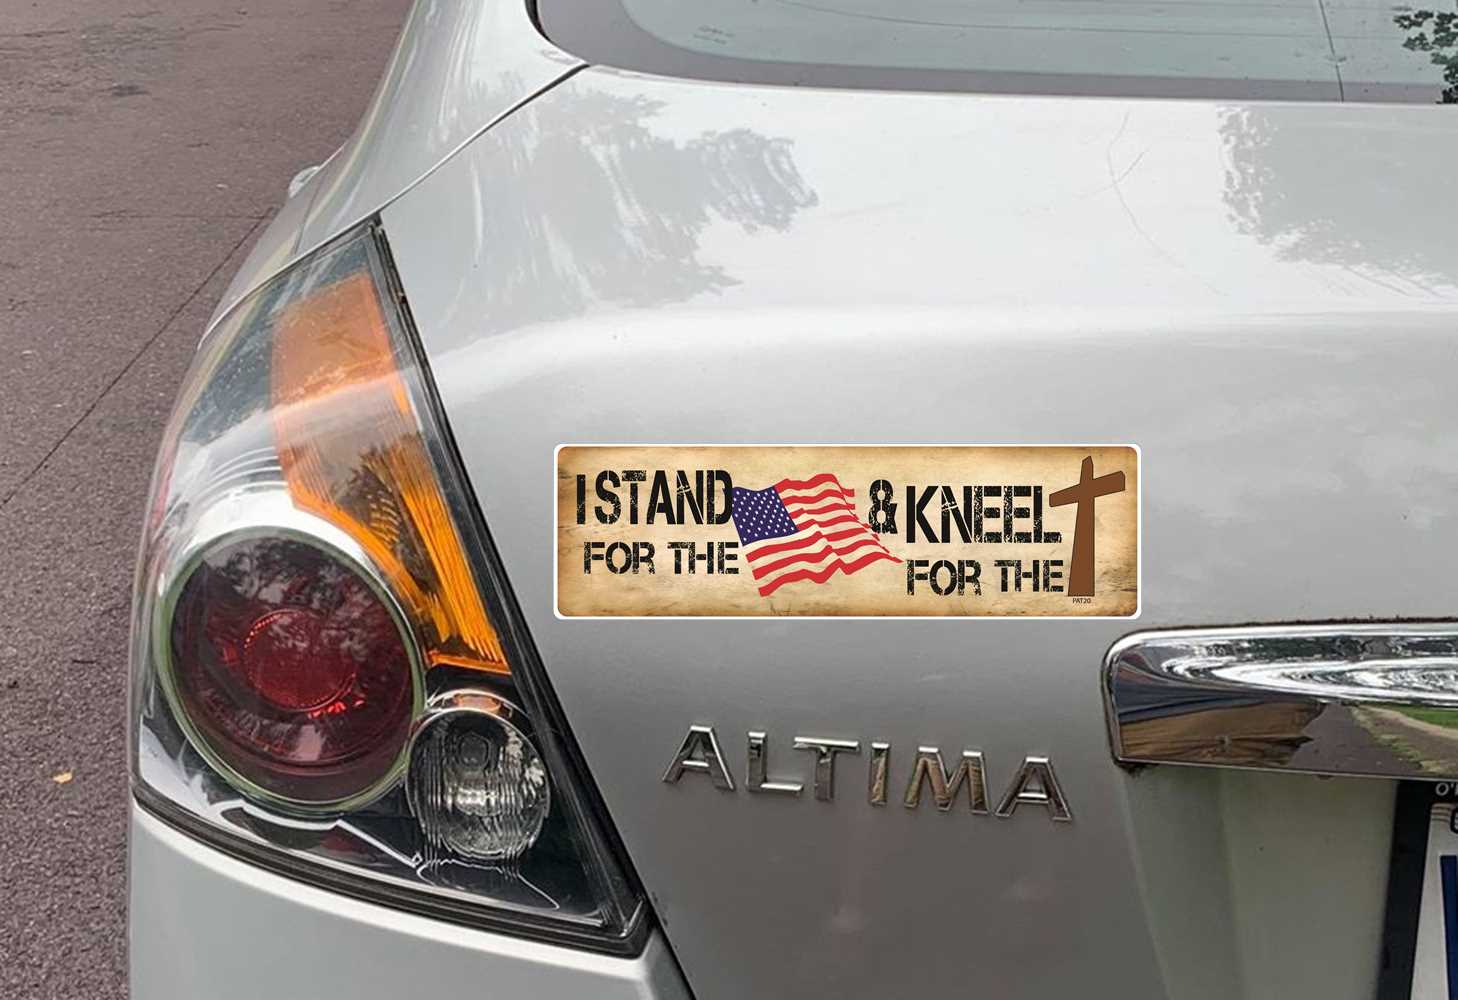 I STAND FOR THE FLAG AND KNEEL FOR THE CROSS BUMPER STICKER ON CAR